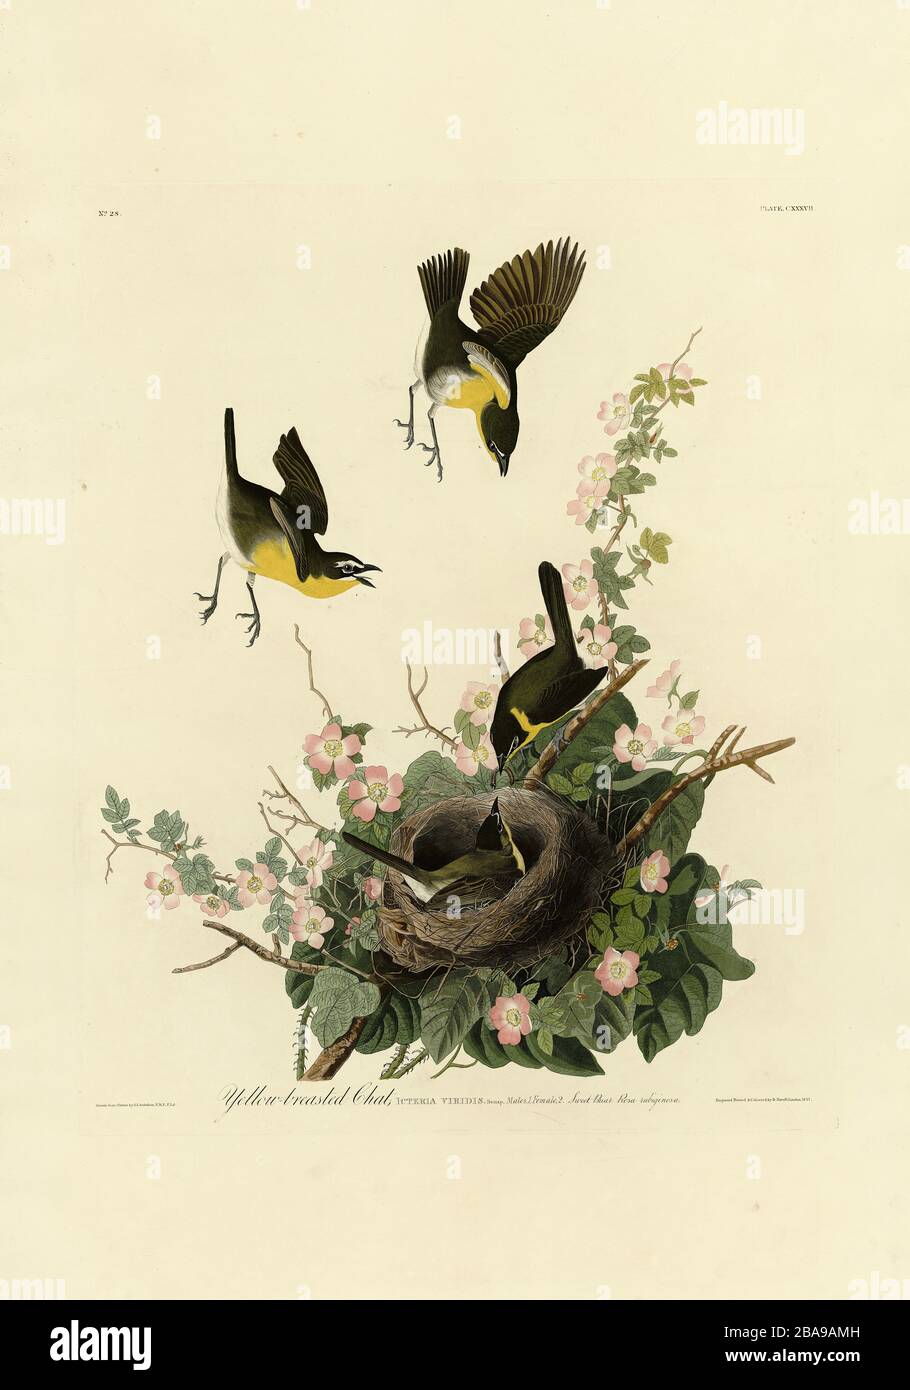 Plate 137 Yellow-breasted Chat from The Birds of America folio (1827–1839) by John James Audubon - Very high resolution and quality edited image Stock Photo